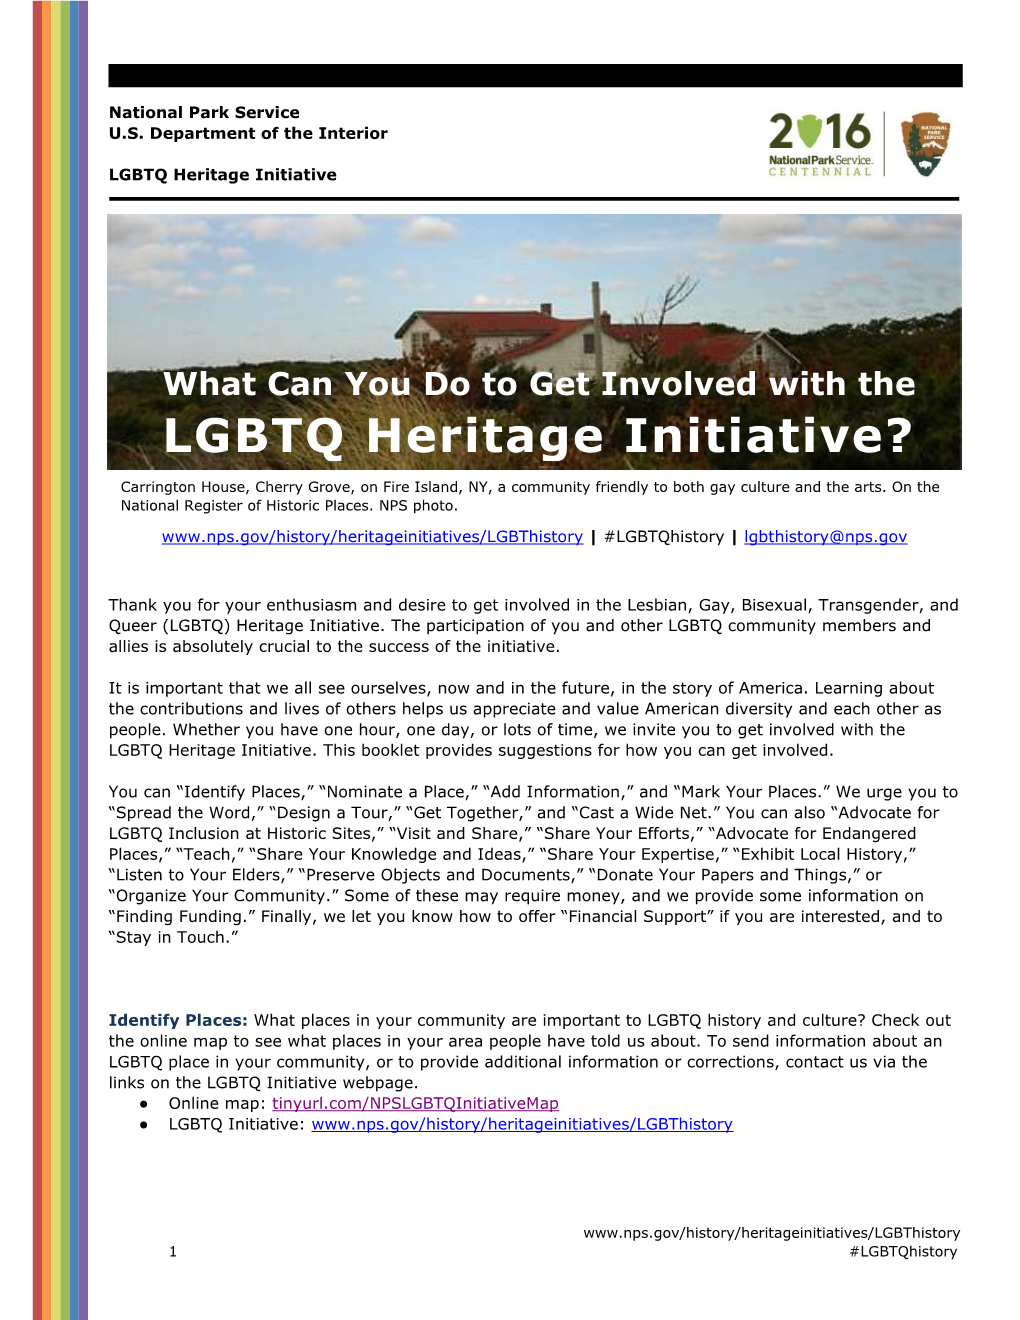 What Can You Do to Get Involved with the LGBTQ Heritage Initiative?